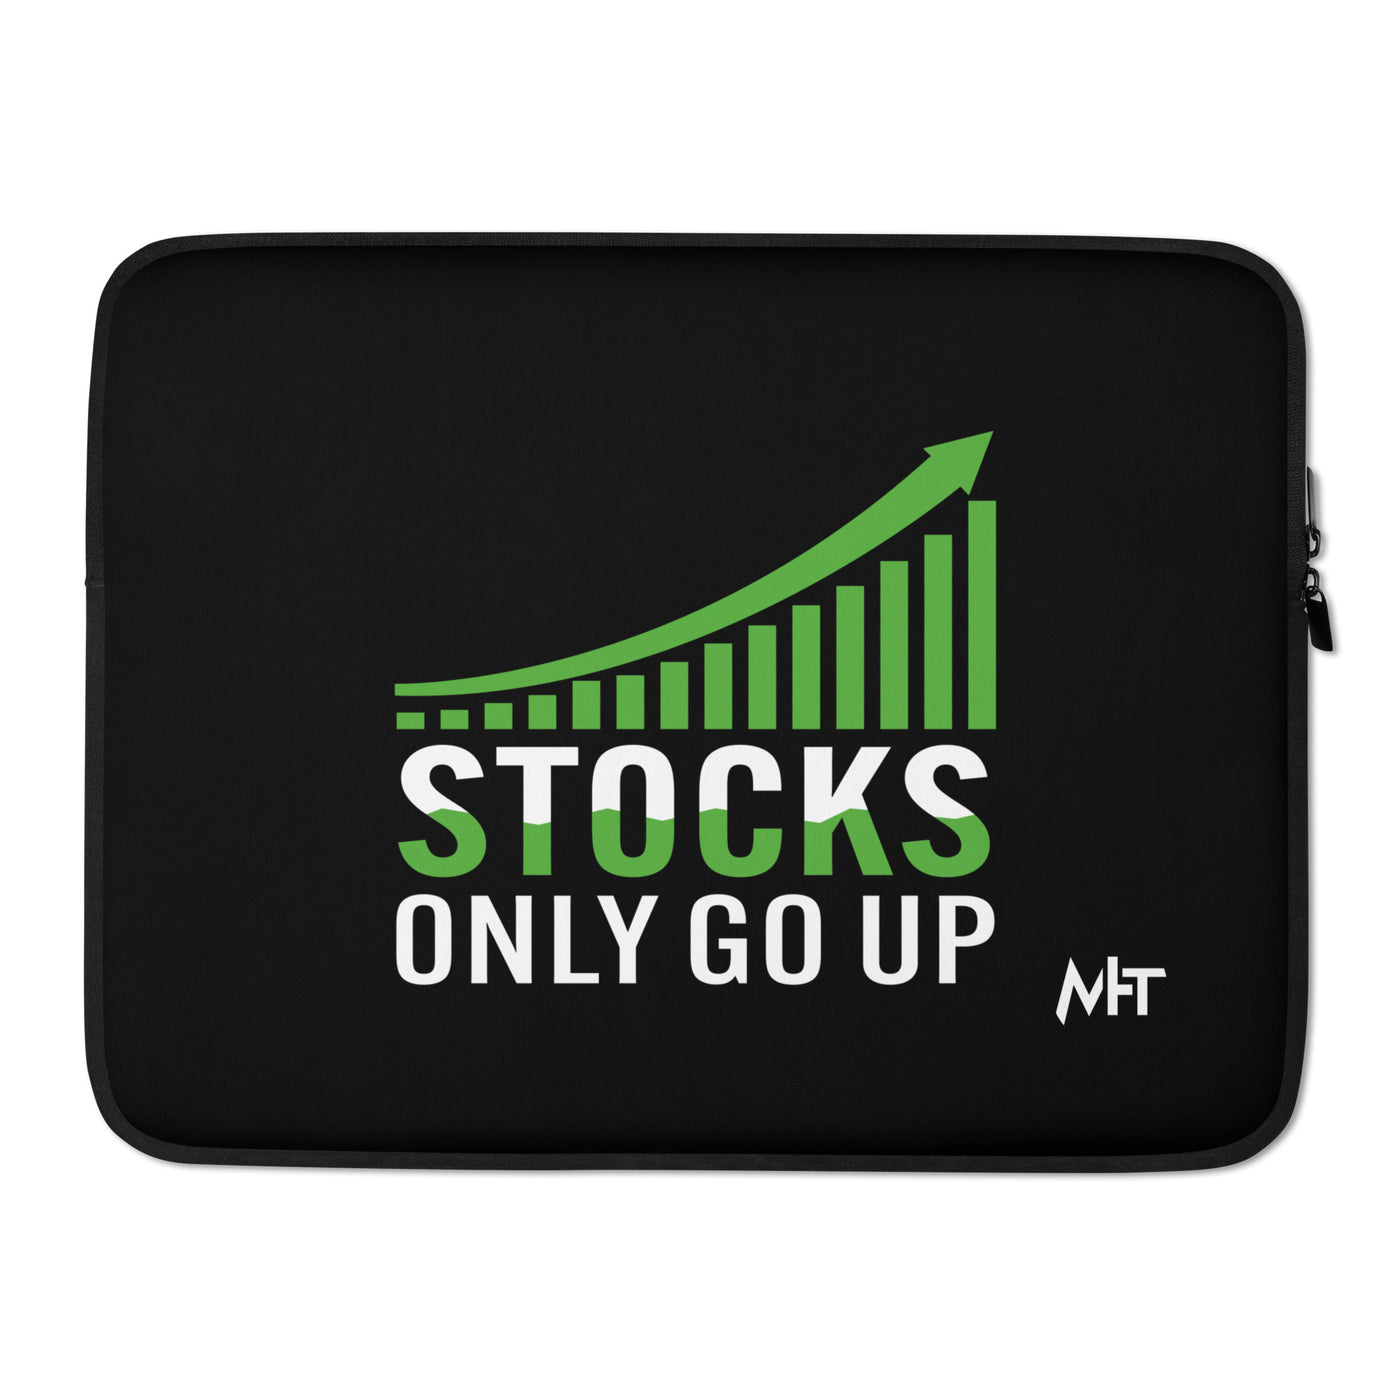 Stocks only Go up - Laptop Sleeve